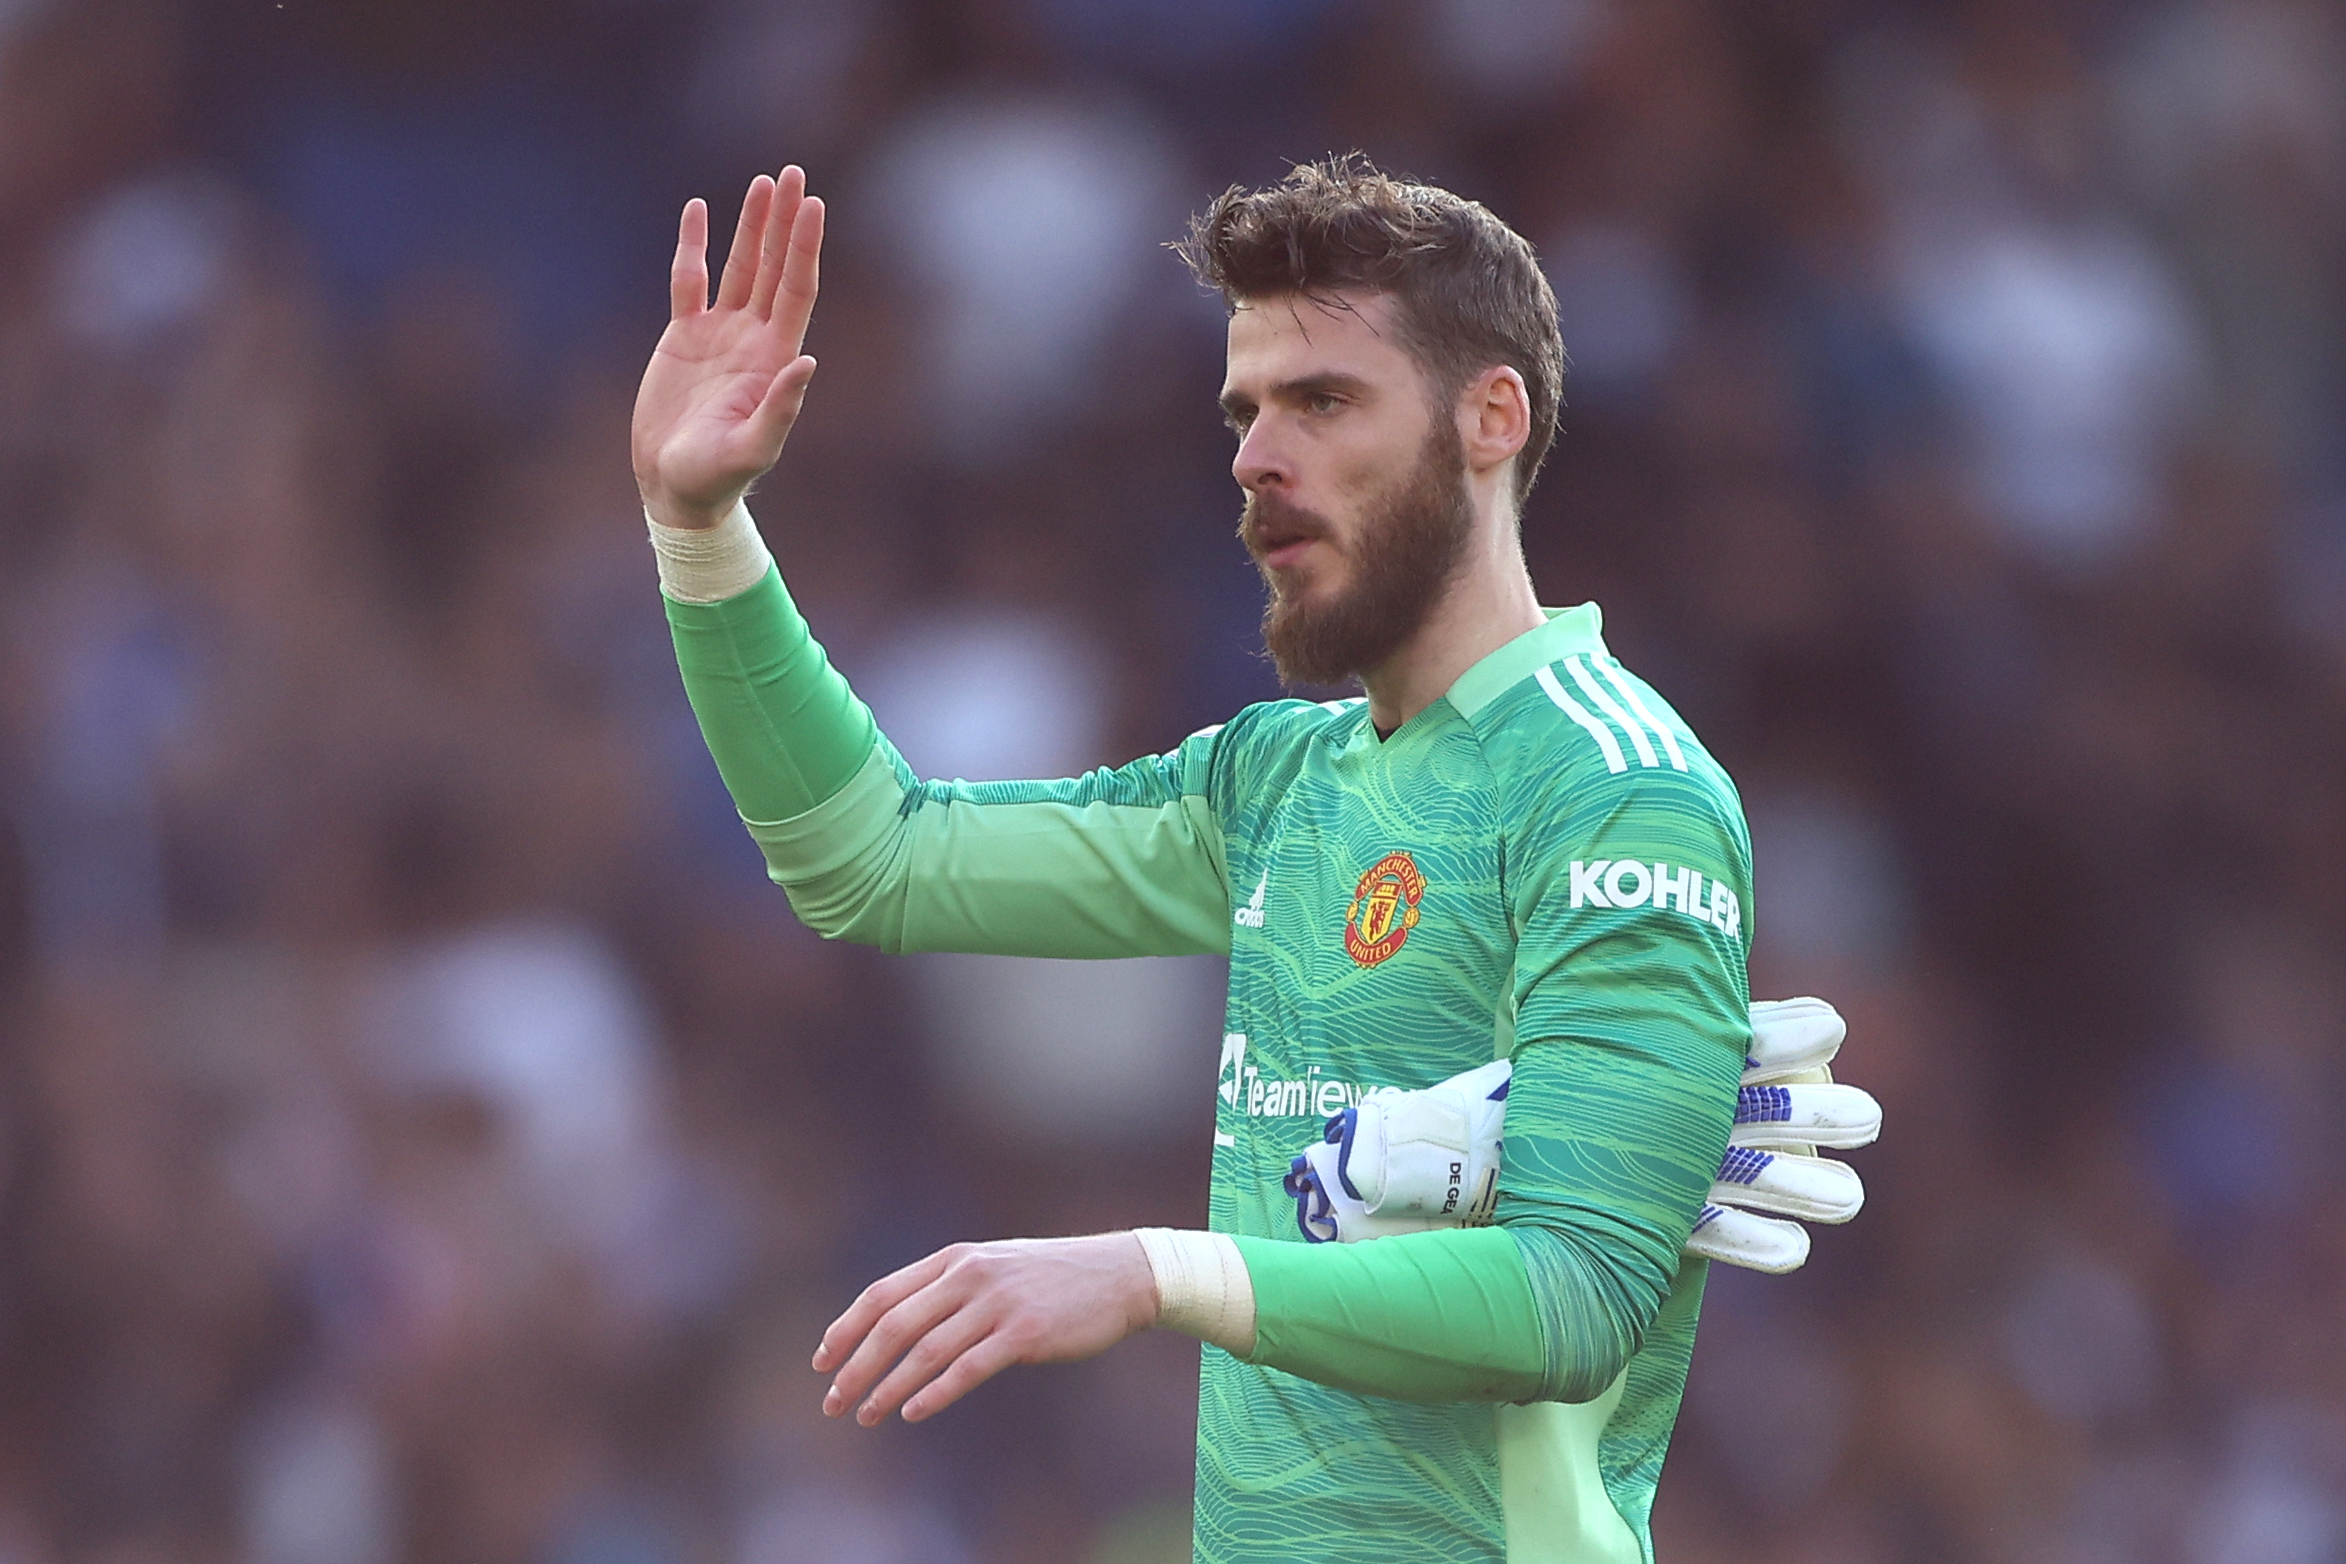 David De Gea has been at United since 2011. (Photo by Bryn Lennon/Getty Images)